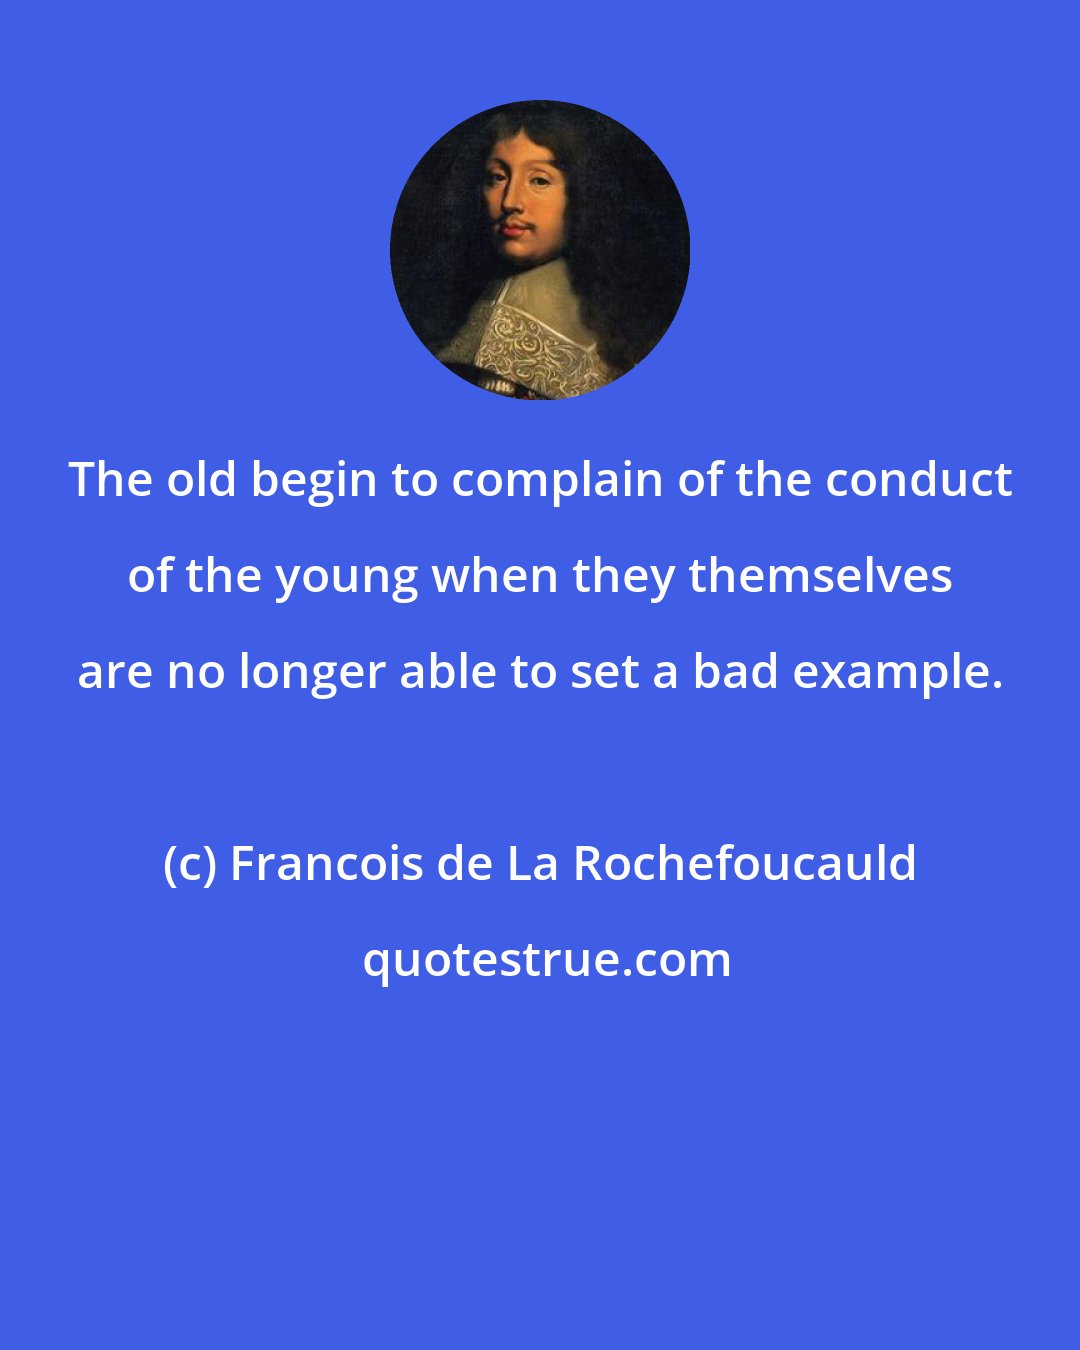 Francois de La Rochefoucauld: The old begin to complain of the conduct of the young when they themselves are no longer able to set a bad example.